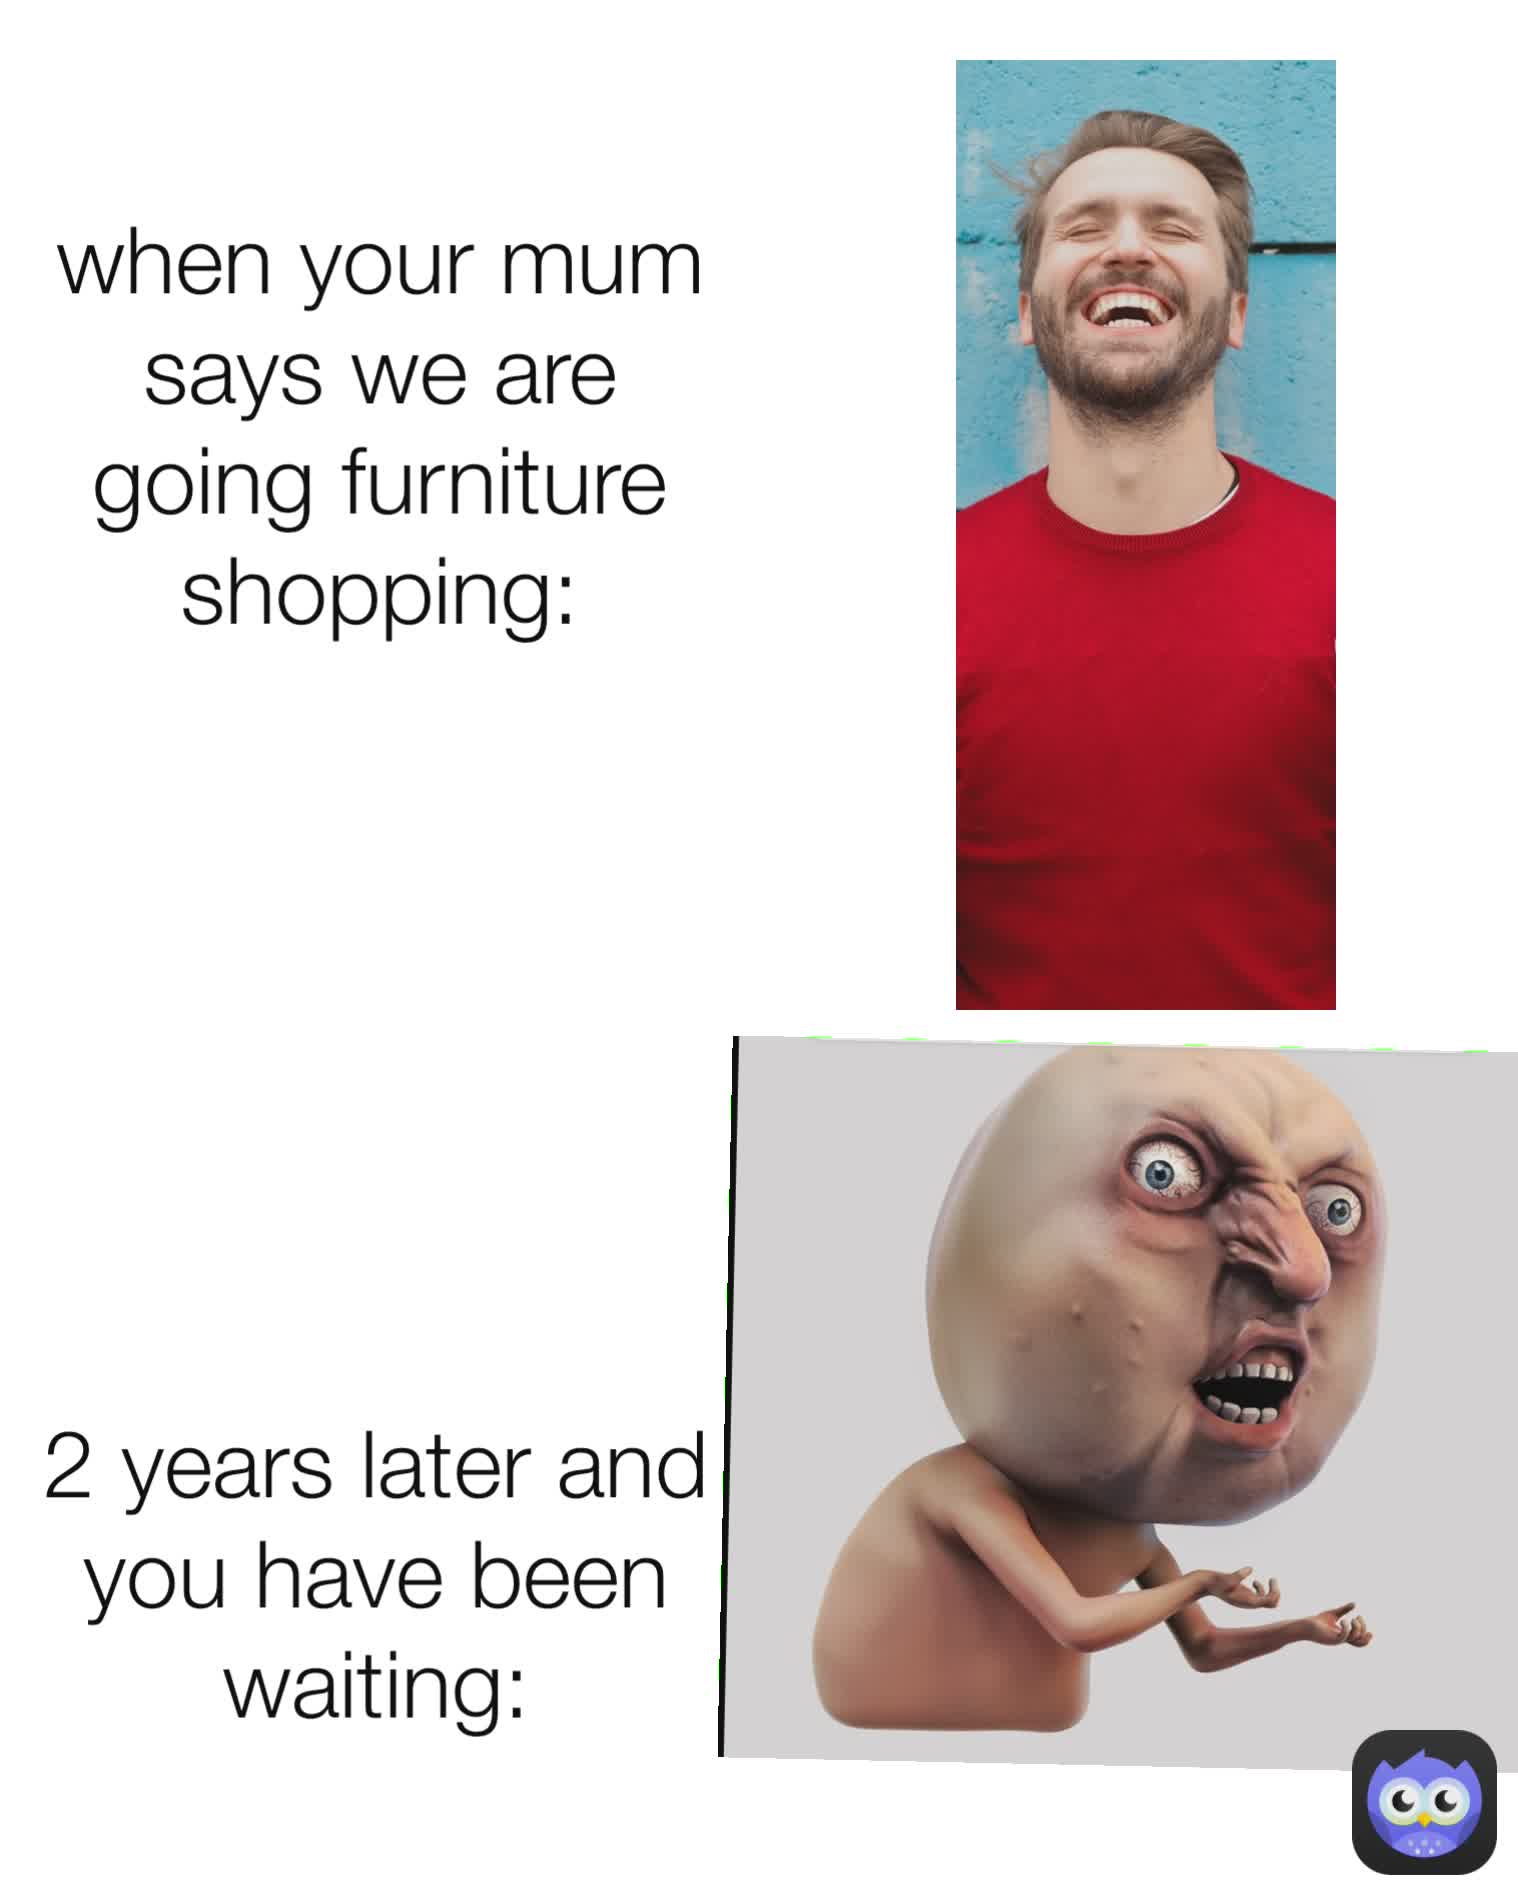 2 years later and you have been waiting:

 when your mum says we are going furniture shopping:
